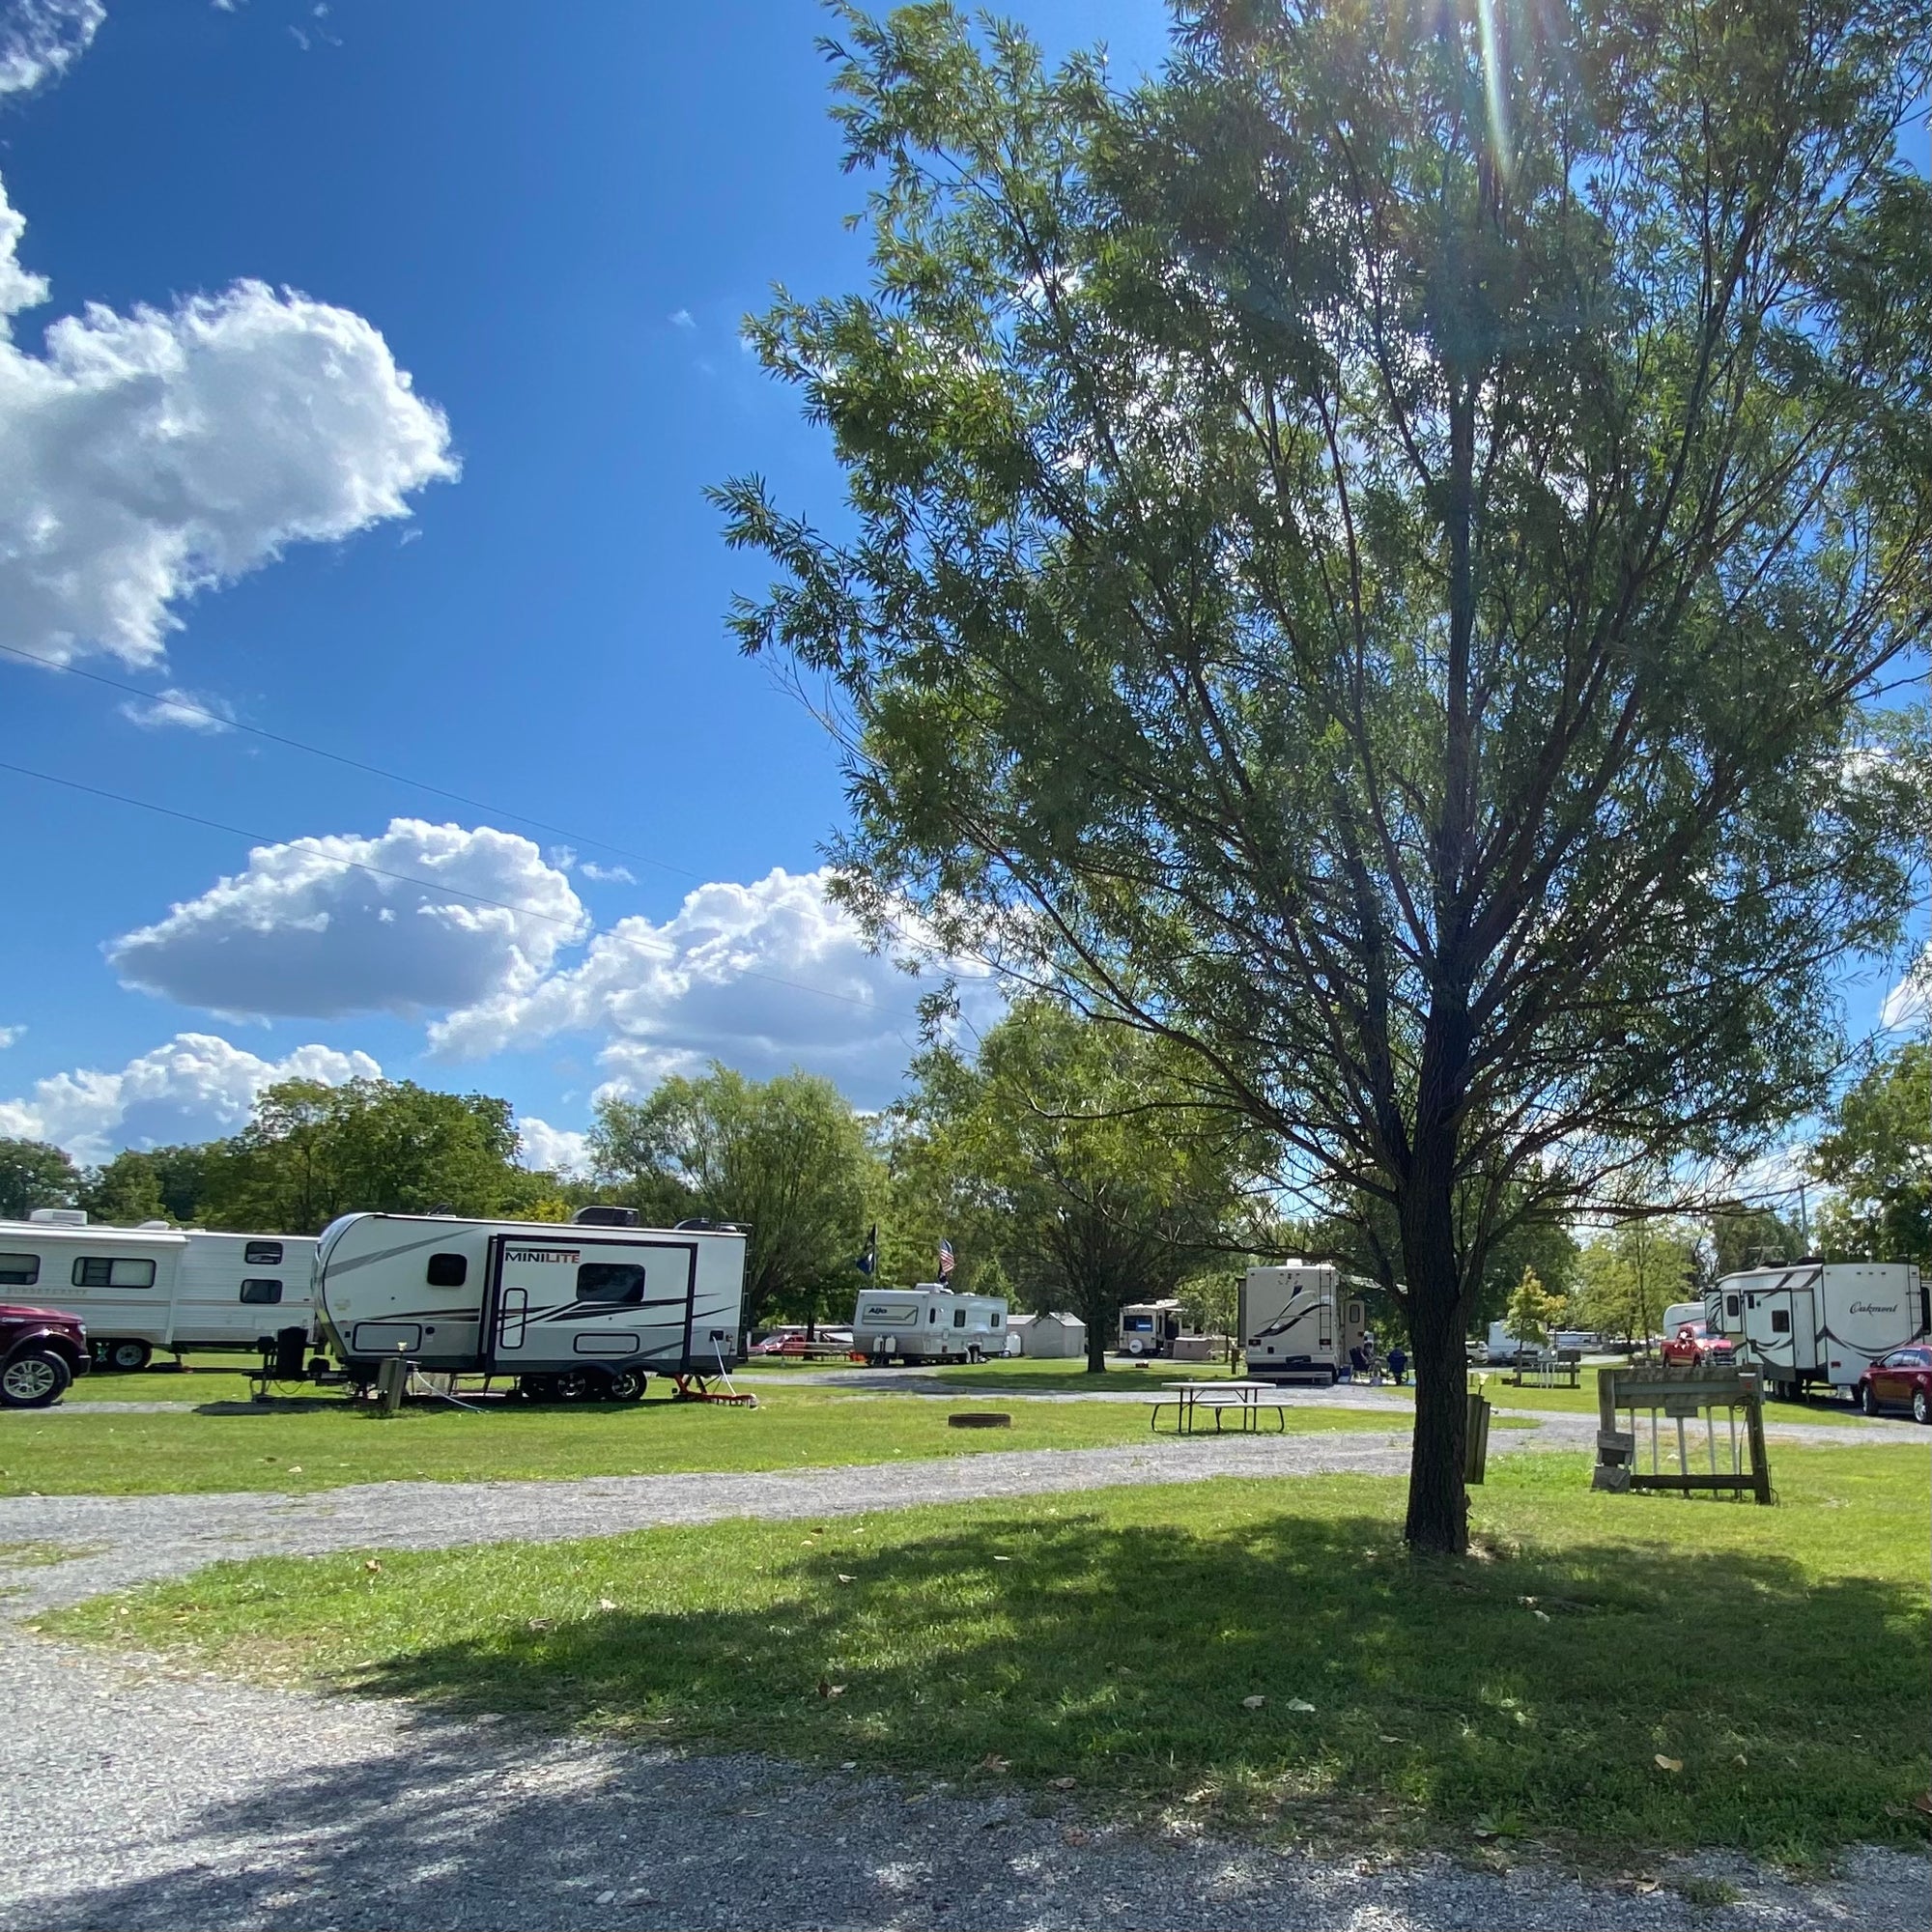 overview of pull thru sites at happy acres. shows ~5 rvs and a large tree